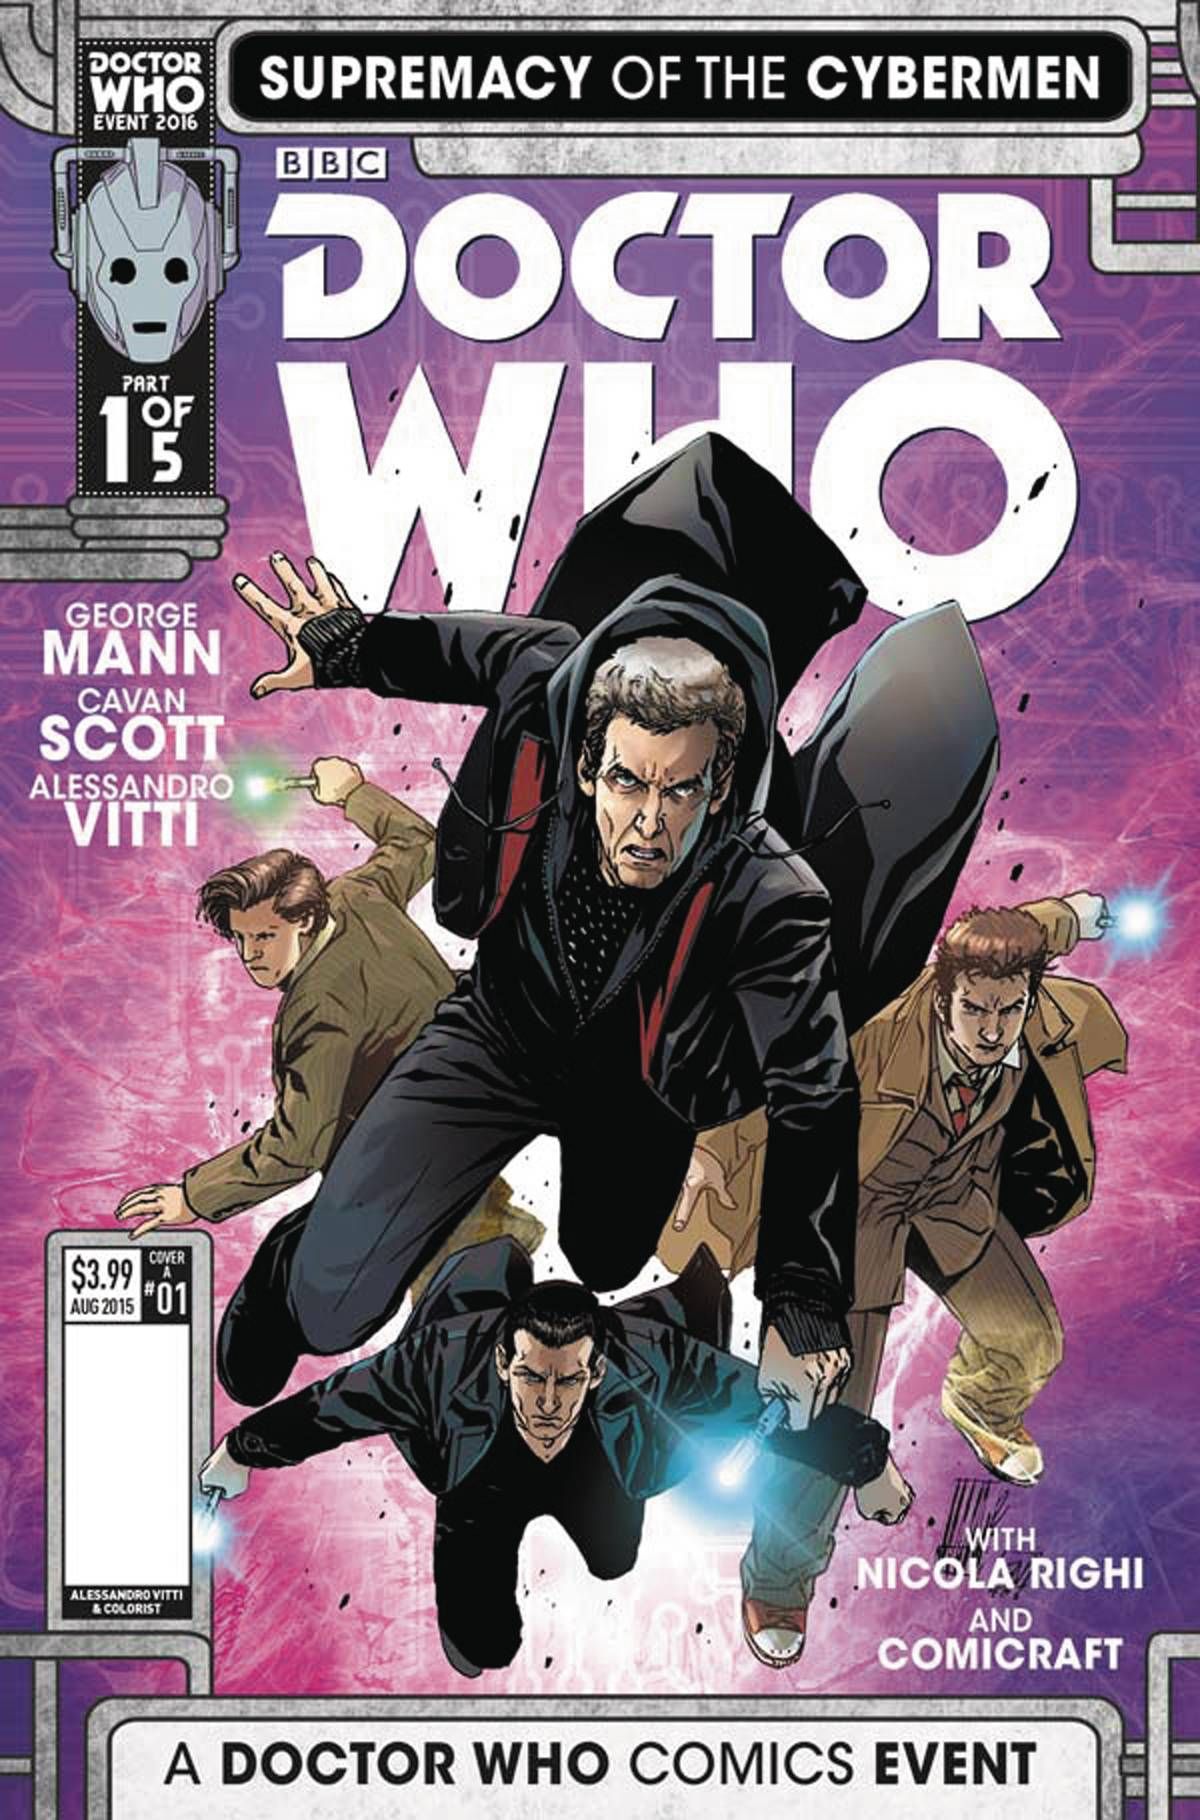 Doctor Who: Supremacy of the Cybermen #1 Comic